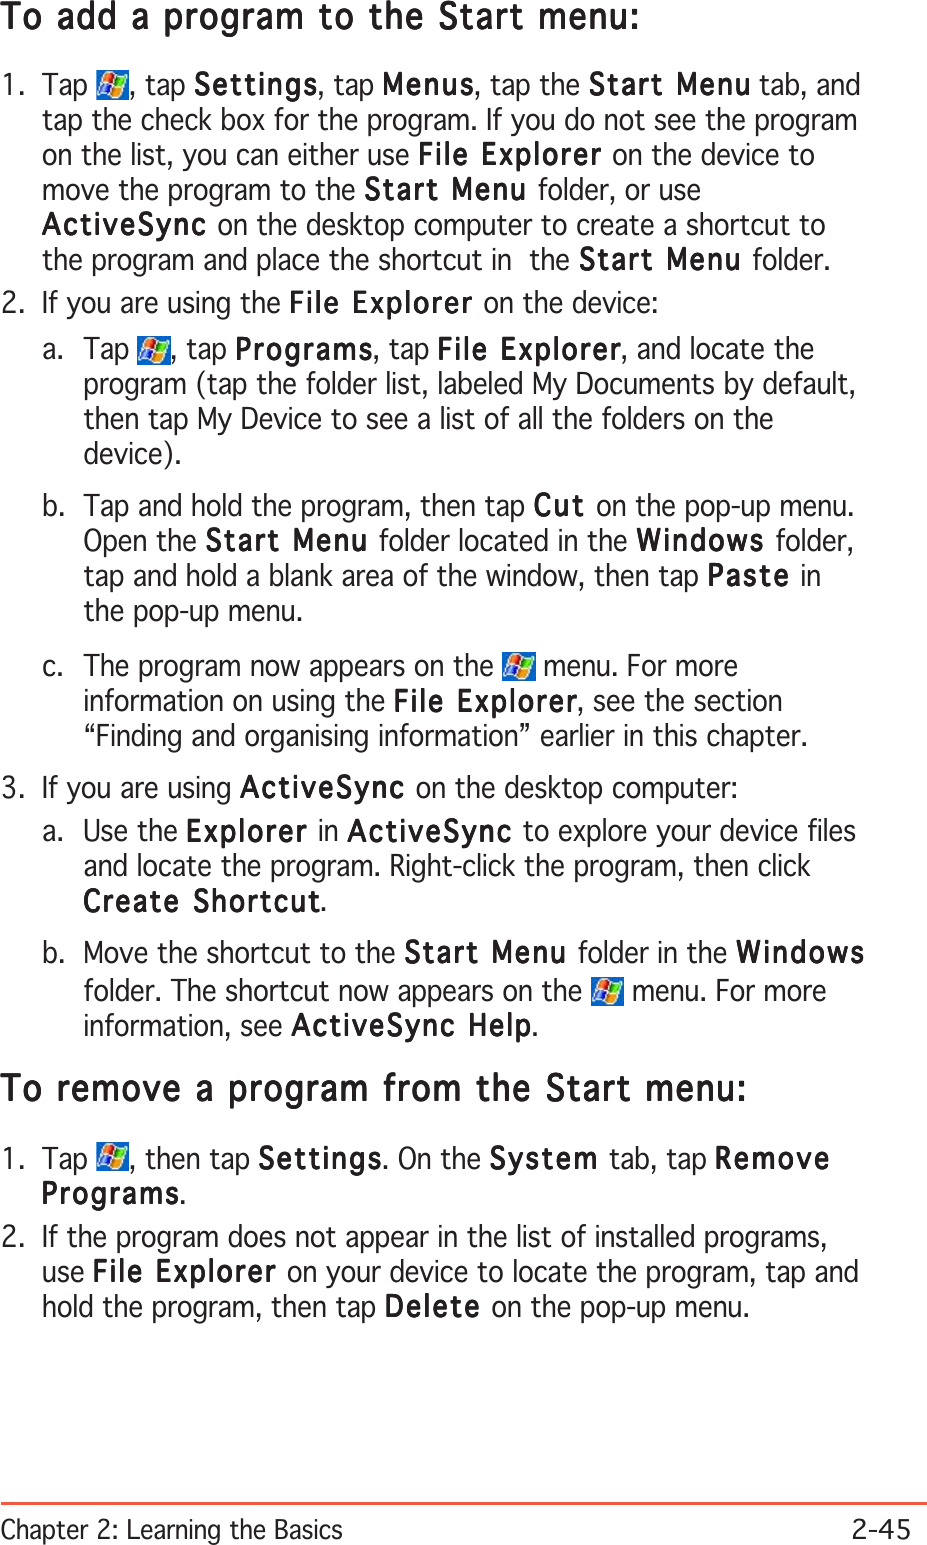 Chapter 2: Learning the Basics2-45To add a program to the Start menu:To add a program to the Start menu:To add a program to the Start menu:To add a program to the Start menu:To add a program to the Start menu:1. Tap  , tap SettingsSettingsSettingsSettingsSettings, tap MenusMenusMenusMenusMe n us, tap the Start MenuStart MenuStart MenuStart MenuStart Menu tab, andtap the check box for the program. If you do not see the programon the list, you can either use File Explorer File Explorer File Explorer File Explorer File Explorer on the device tomove the program to the Start Menu Start Menu Start Menu Start Menu Start Menu folder, or useActiveSyncActiveSyncActiveSyncActiveSyncActiveSync on the desktop computer to create a shortcut tothe program and place the shortcut in  the Start Menu Start Menu Start Menu Start Menu Start Menu folder.2. If you are using the File Explorer File Explorer File Explorer File Explorer File Explorer on the device:a. Tap  , tap ProgramsProgramsProgramsProgramsPrograms, tap File ExplorerFile ExplorerFile ExplorerFile ExplorerFile Explorer, and locate theprogram (tap the folder list, labeled My Documents by default,then tap My Device to see a list of all the folders on thedevice).b. Tap and hold the program, then tap CutCutCutCutCut on the pop-up menu.Open the Start Menu Start Menu Start Menu Start Menu Start Menu folder located in the WindowsWindowsWindowsWindowsWindows folder,tap and hold a blank area of the window, then tap PastePastePastePastePaste inthe pop-up menu.c. The program now appears on the   menu. For moreinformation on using the File ExplorerFile ExplorerFile ExplorerFile ExplorerFile Explorer, see the section“Finding and organising information” earlier in this chapter.3. If you are using ActiveSyncActiveSyncActiveSyncActiveSyncActiveSync on the desktop computer:a. Use the ExplorerExplorerExplorerExplorerExplorer in ActiveSyncActiveSyncActiveSyncActiveSyncActiveSync to explore your device filesand locate the program. Right-click the program, then clickCreate ShortcutCreate ShortcutCreate ShortcutCreate ShortcutCreate Shortcut.b. Move the shortcut to the Start Menu Start Menu Start Menu Start Menu Start Menu folder in the WindowsWindowsWindowsWindowsWindowsfolder. The shortcut now appears on the   menu. For moreinformation, see ActiveSync HelpActiveSync HelpActiveSync HelpActiveSync HelpActiveSync Help.To remove a program from the Start menu:To remove a program from the Start menu:To remove a program from the Start menu:To remove a program from the Start menu:To remove a program from the Start menu:1. Tap  , then tap SettingsSettingsSettingsSettingsSettings. On the SystemSystemSystemSystemSys tem tab, tap RemoveRemoveRemoveRemoveRemoveProgramsProgramsProgramsProgramsPrograms.2. If the program does not appear in the list of installed programs,use File Explorer File Explorer File Explorer File Explorer File Explorer on your device to locate the program, tap andhold the program, then tap DeleteDeleteDeleteDeleteDelete on the pop-up menu.